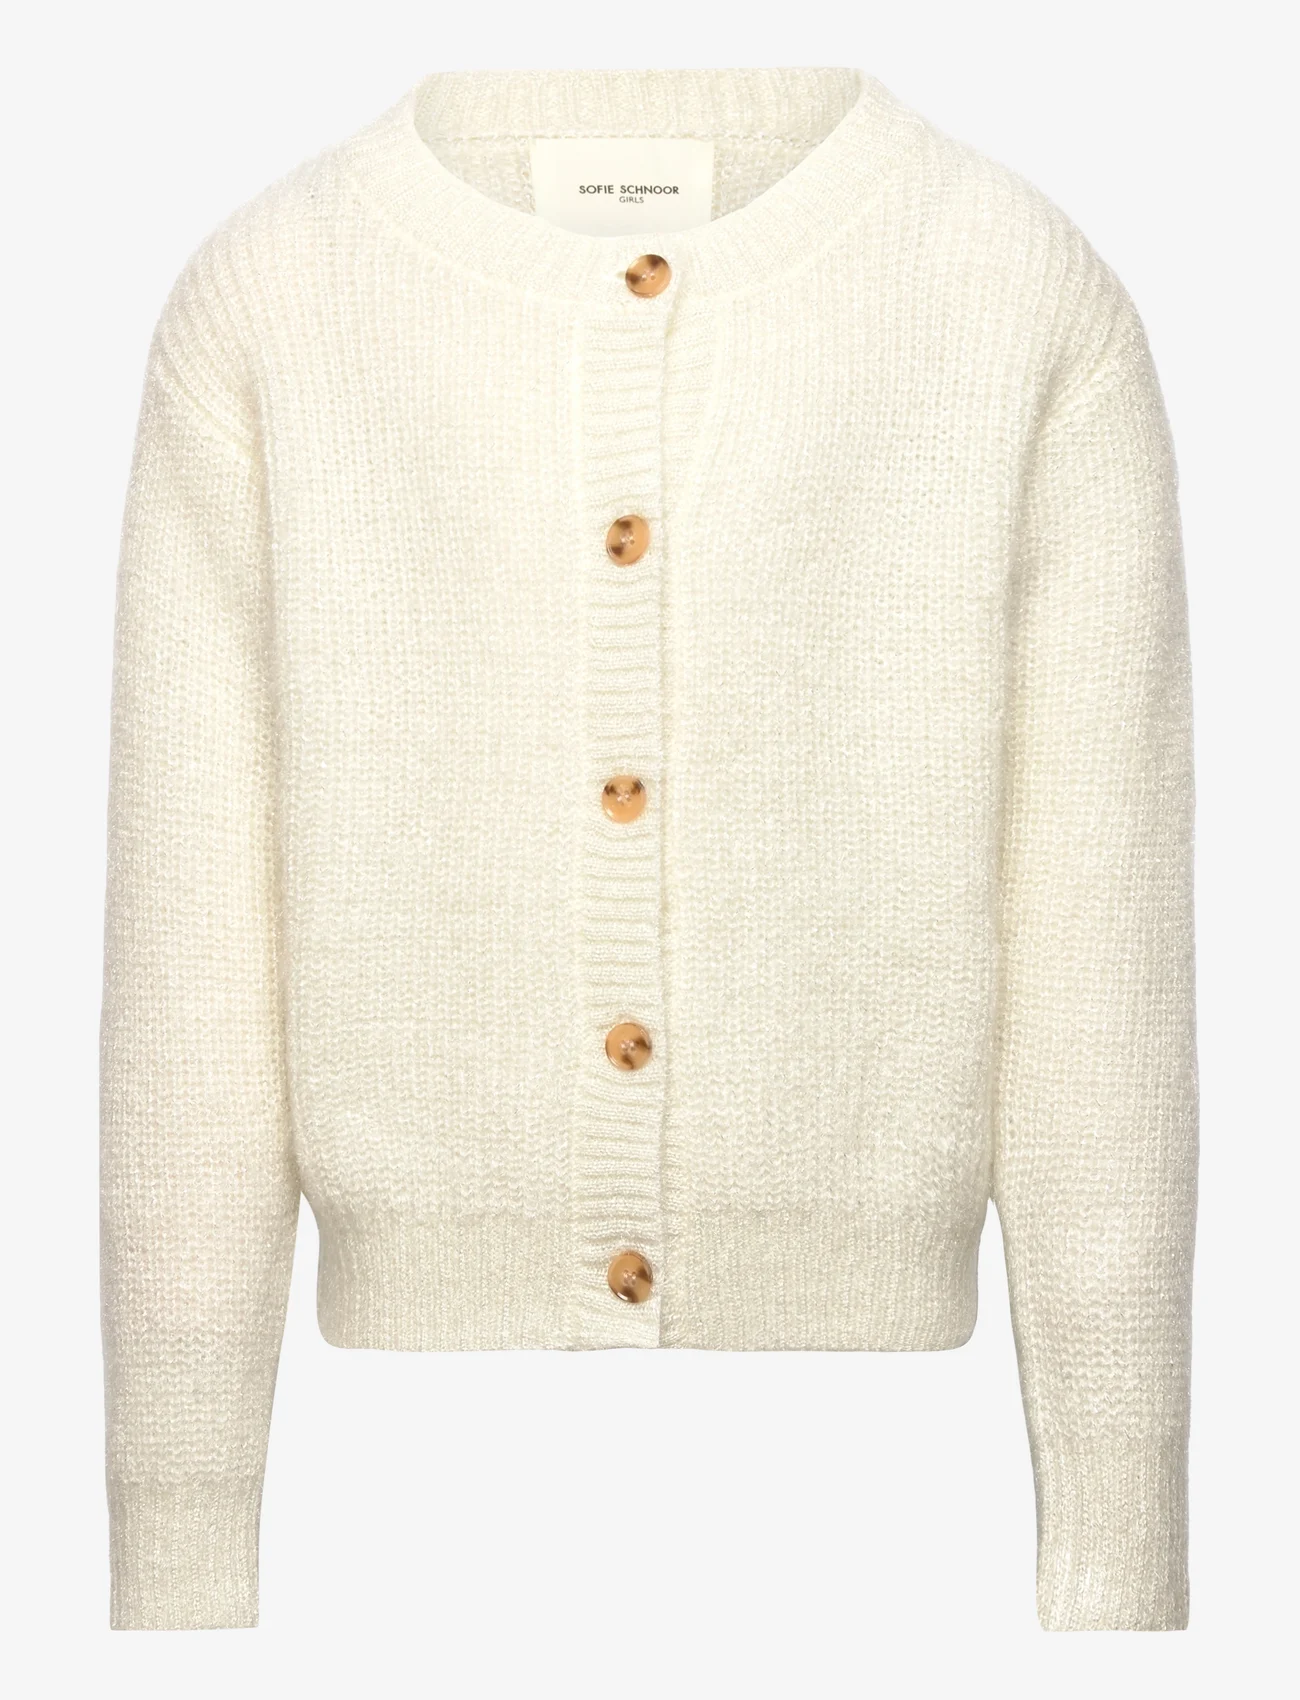 Sofie Schnoor Young - Cardigan - kardiganid - off white - 0